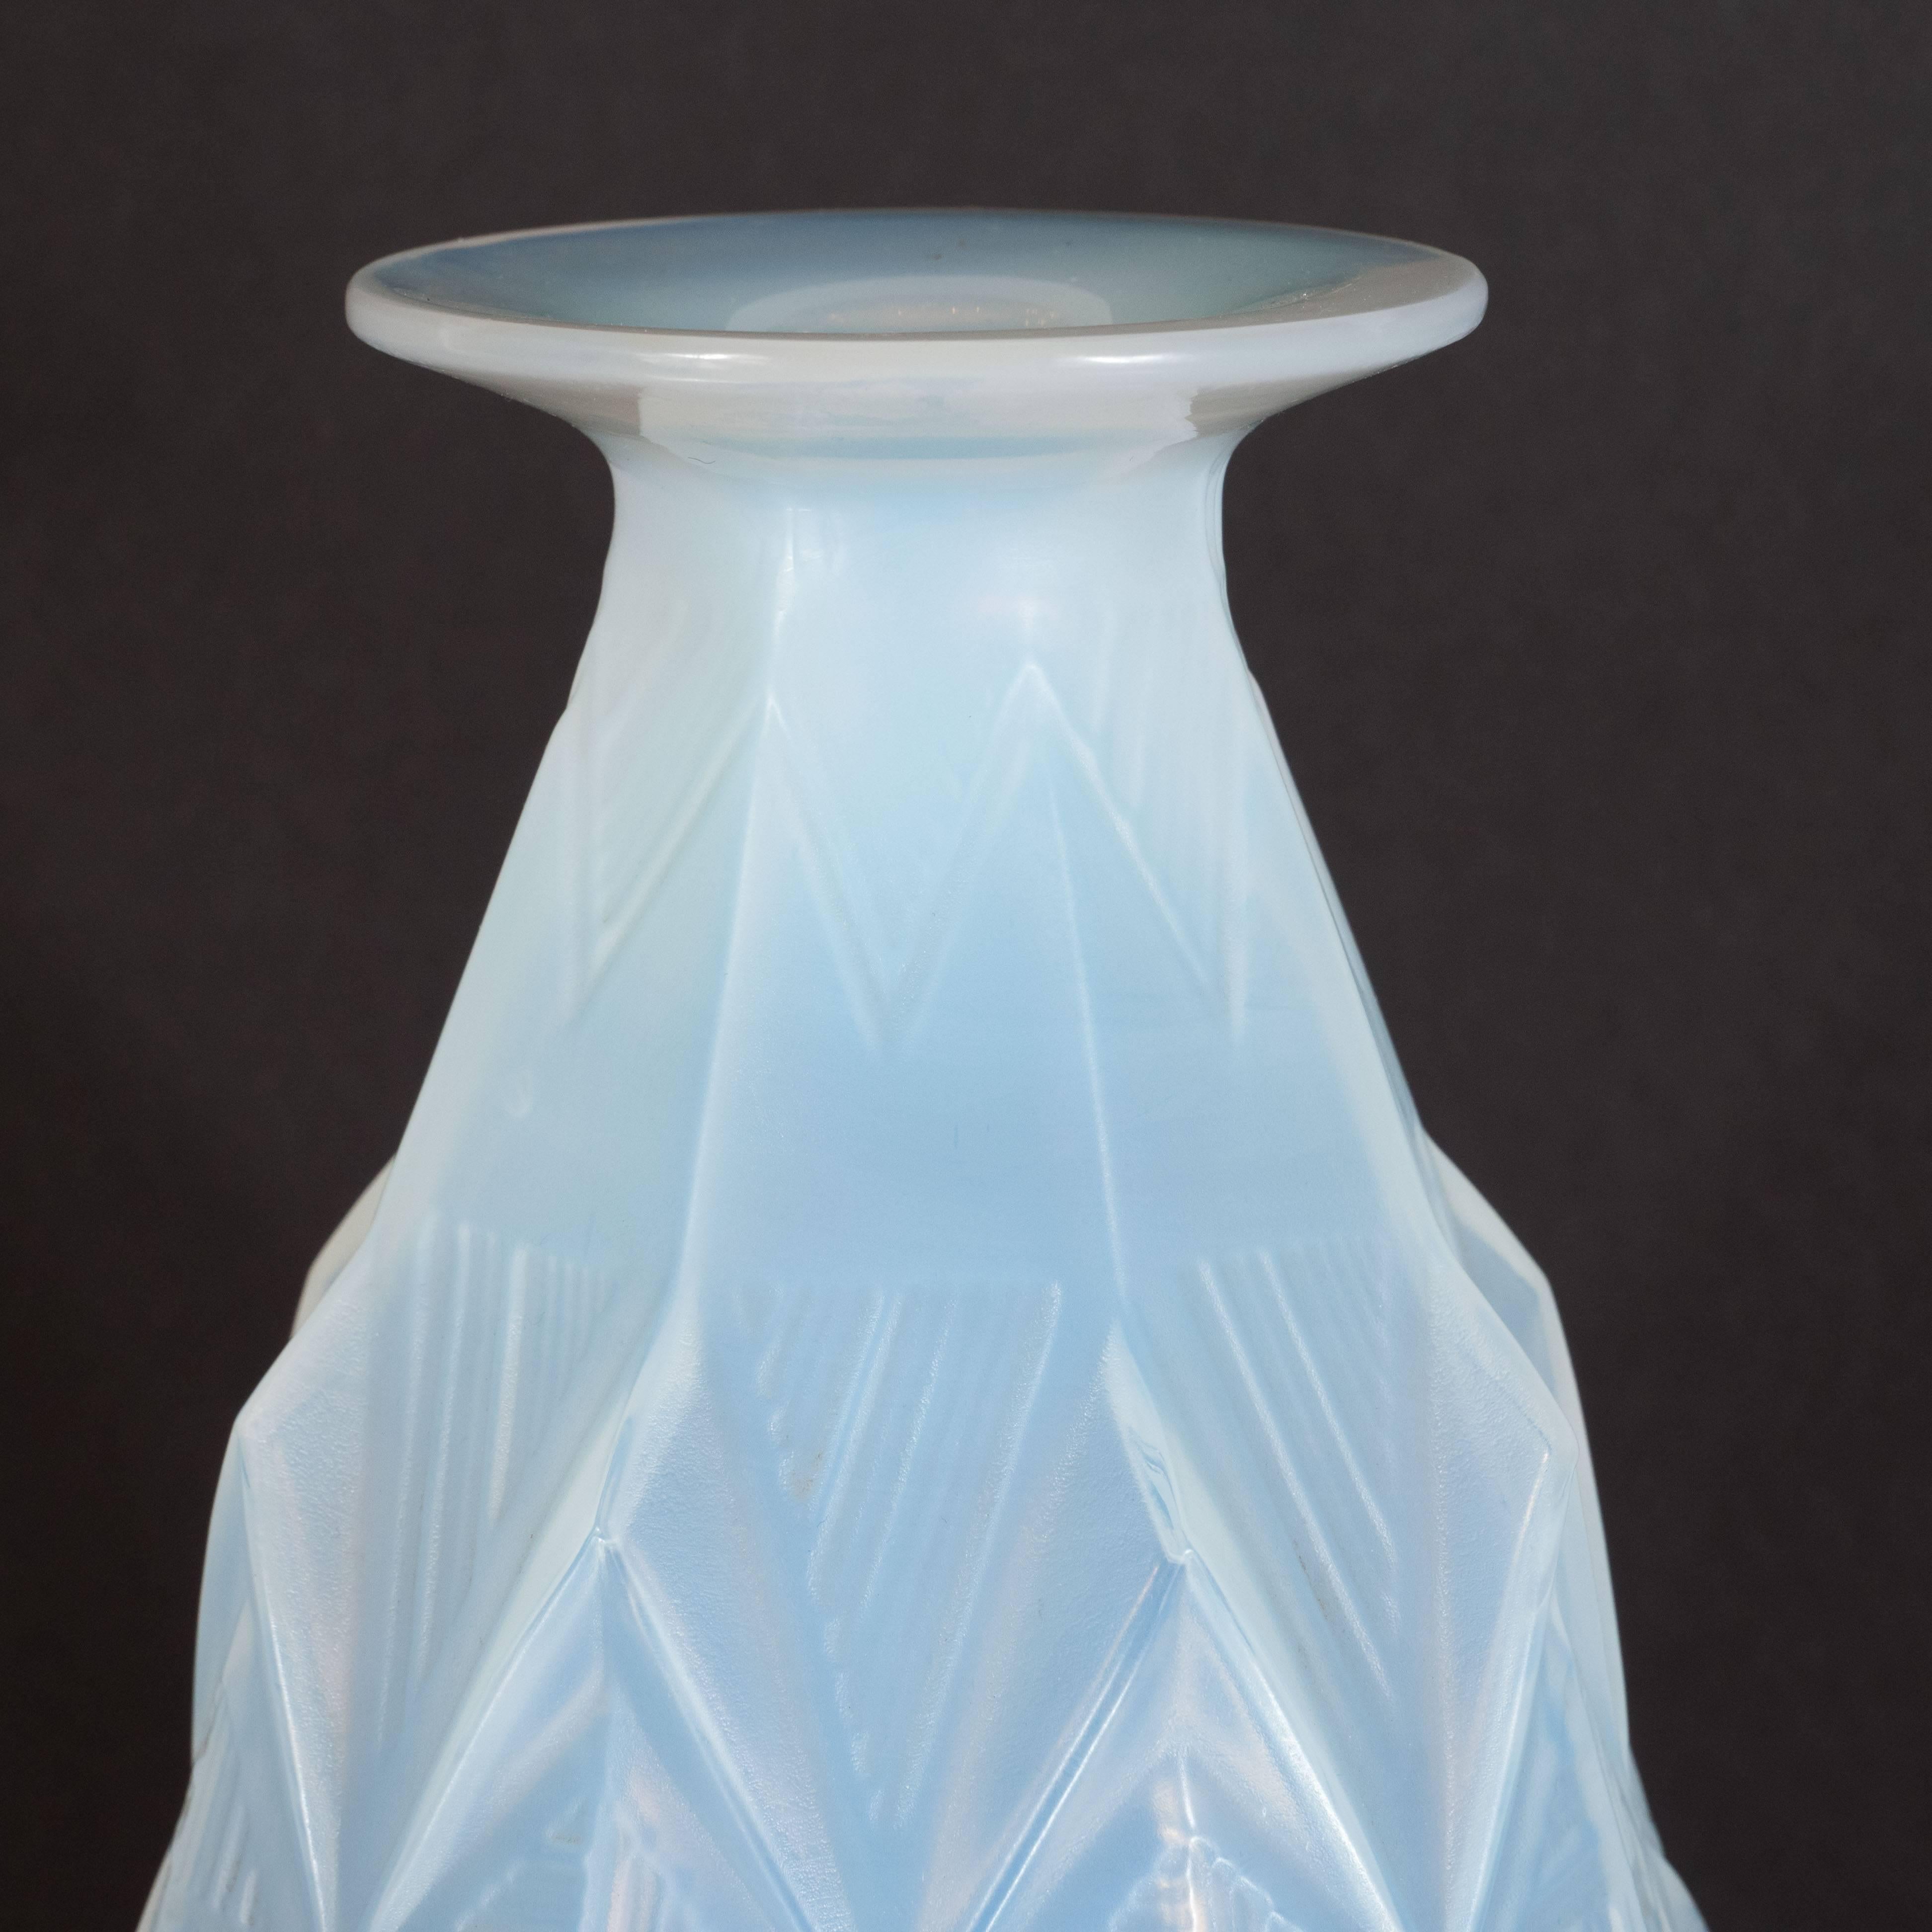 Glass French Art Deco Opalescent Vase with Geometric Patterns in Relief Signed Sabino